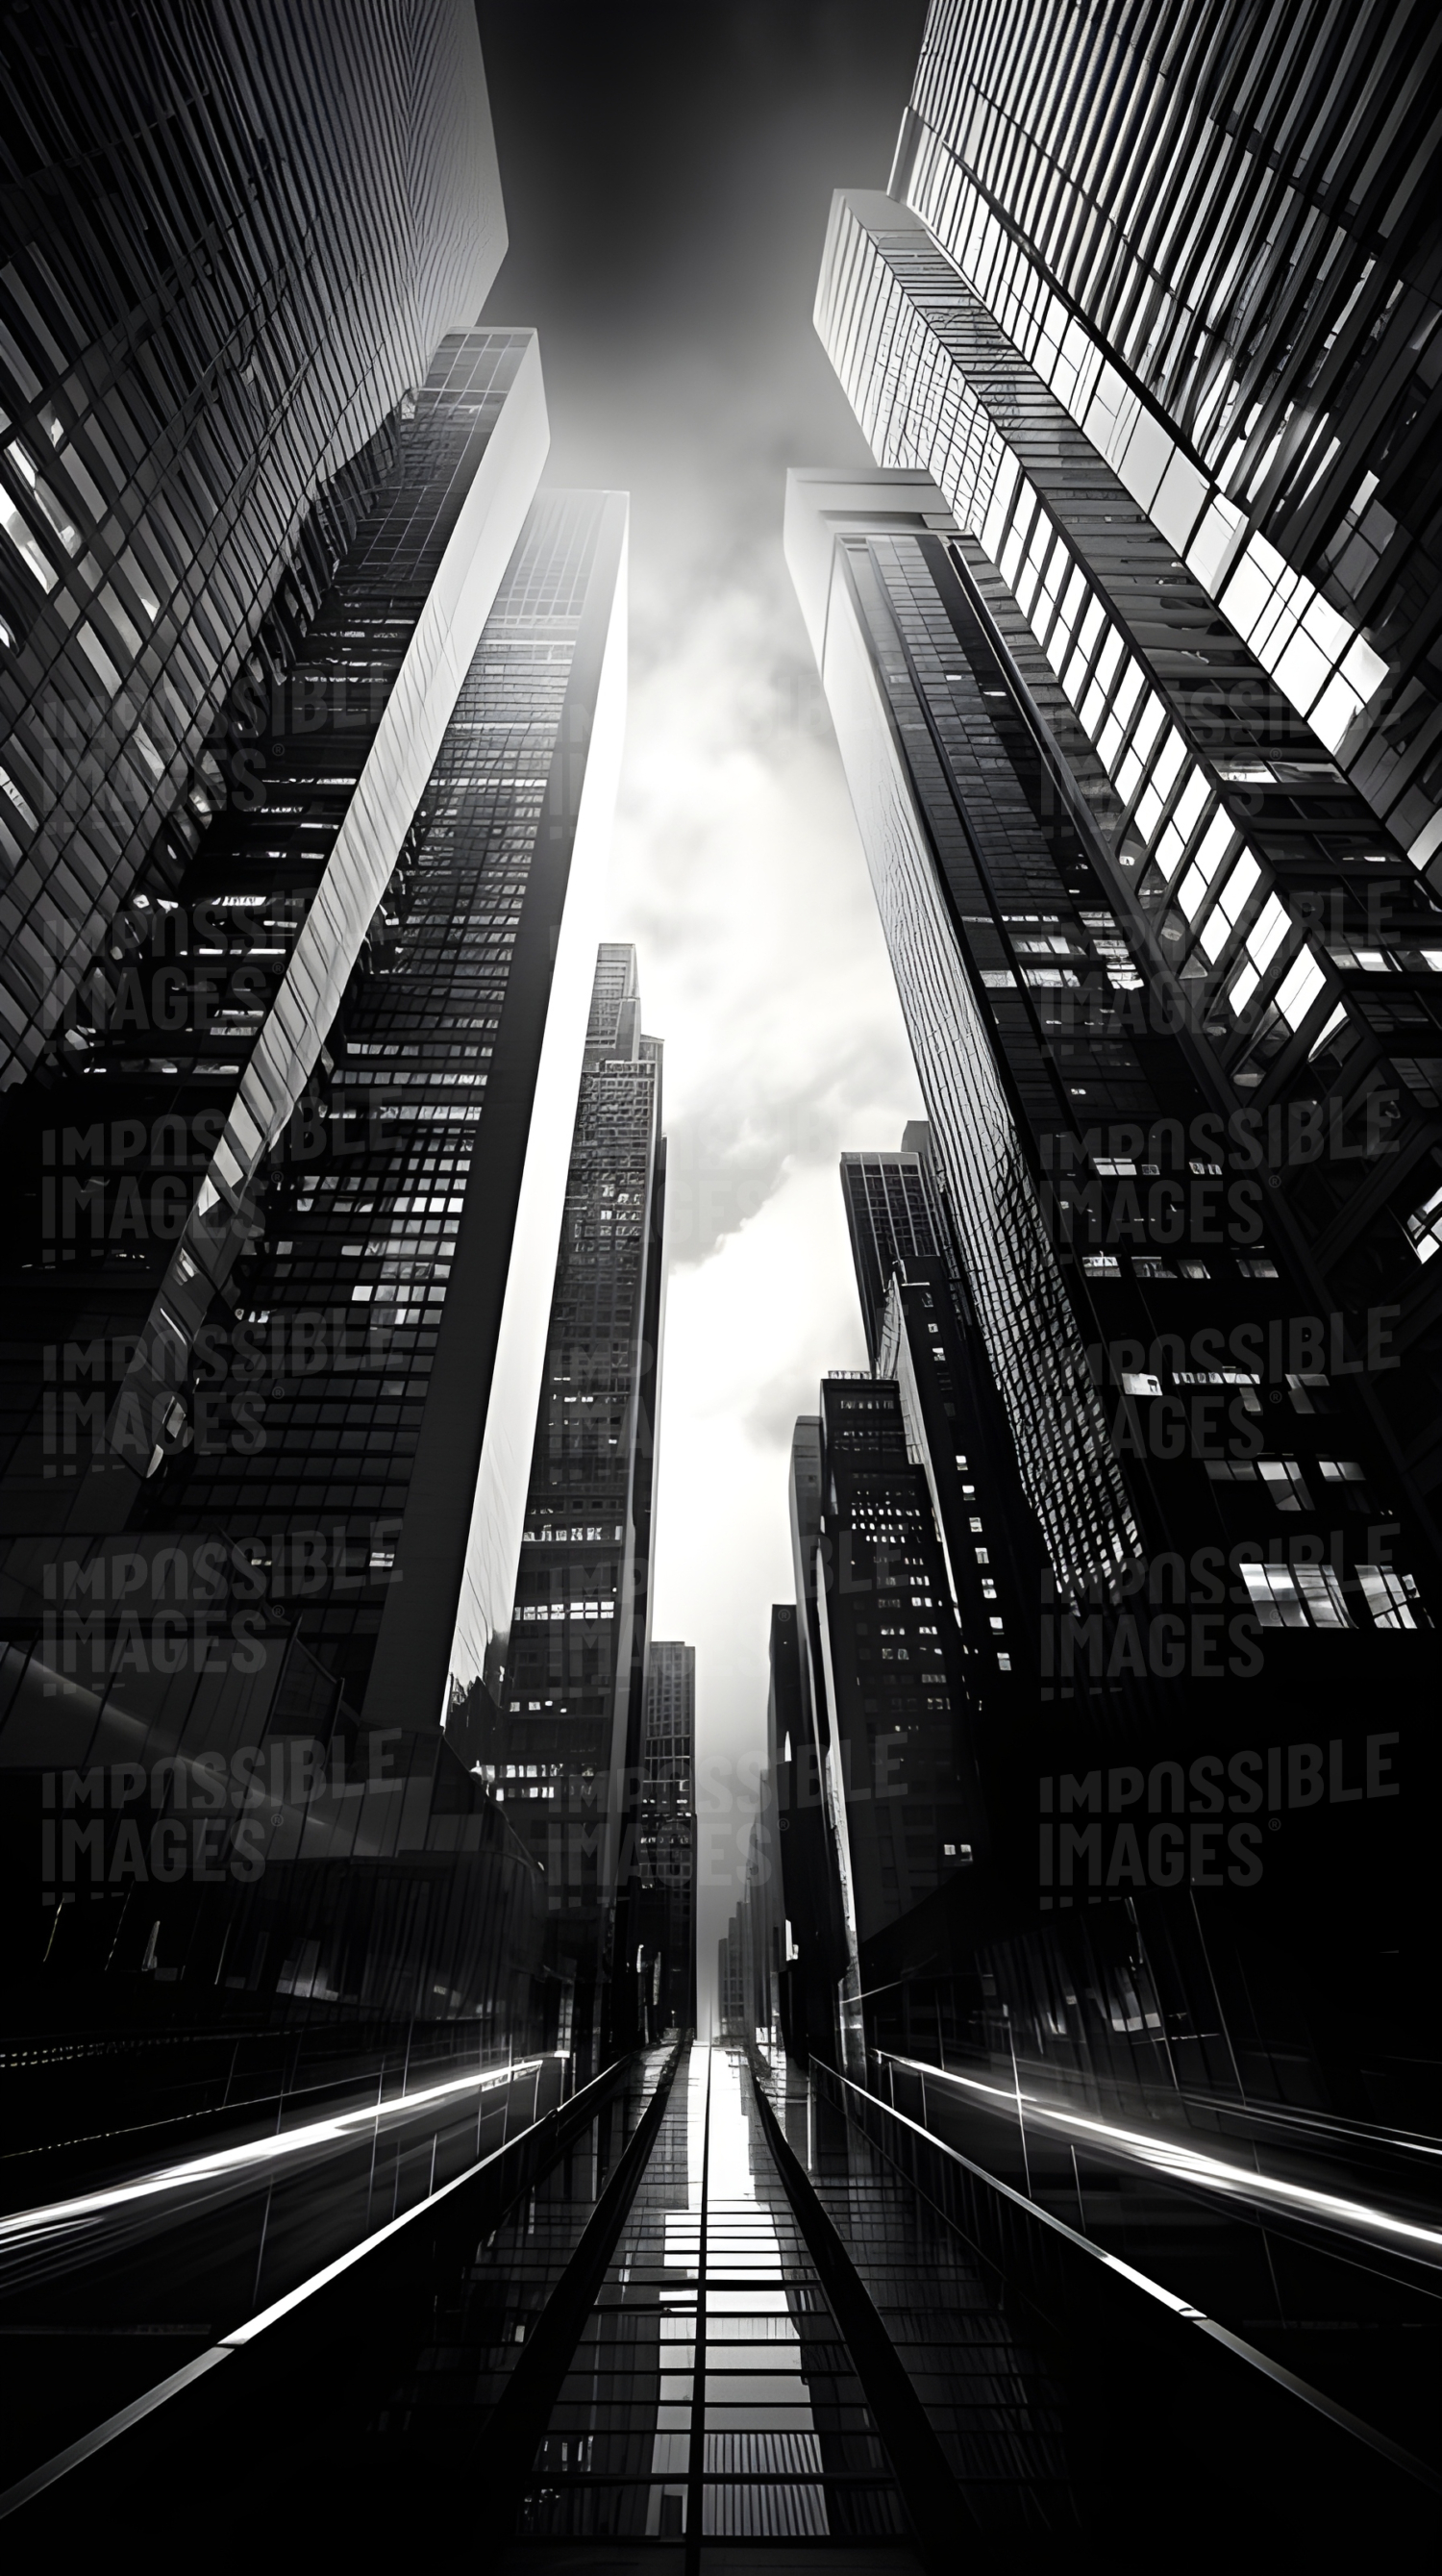 Striking black and white high contrast photo of a city of modern skyscrapers receding into the distance - 